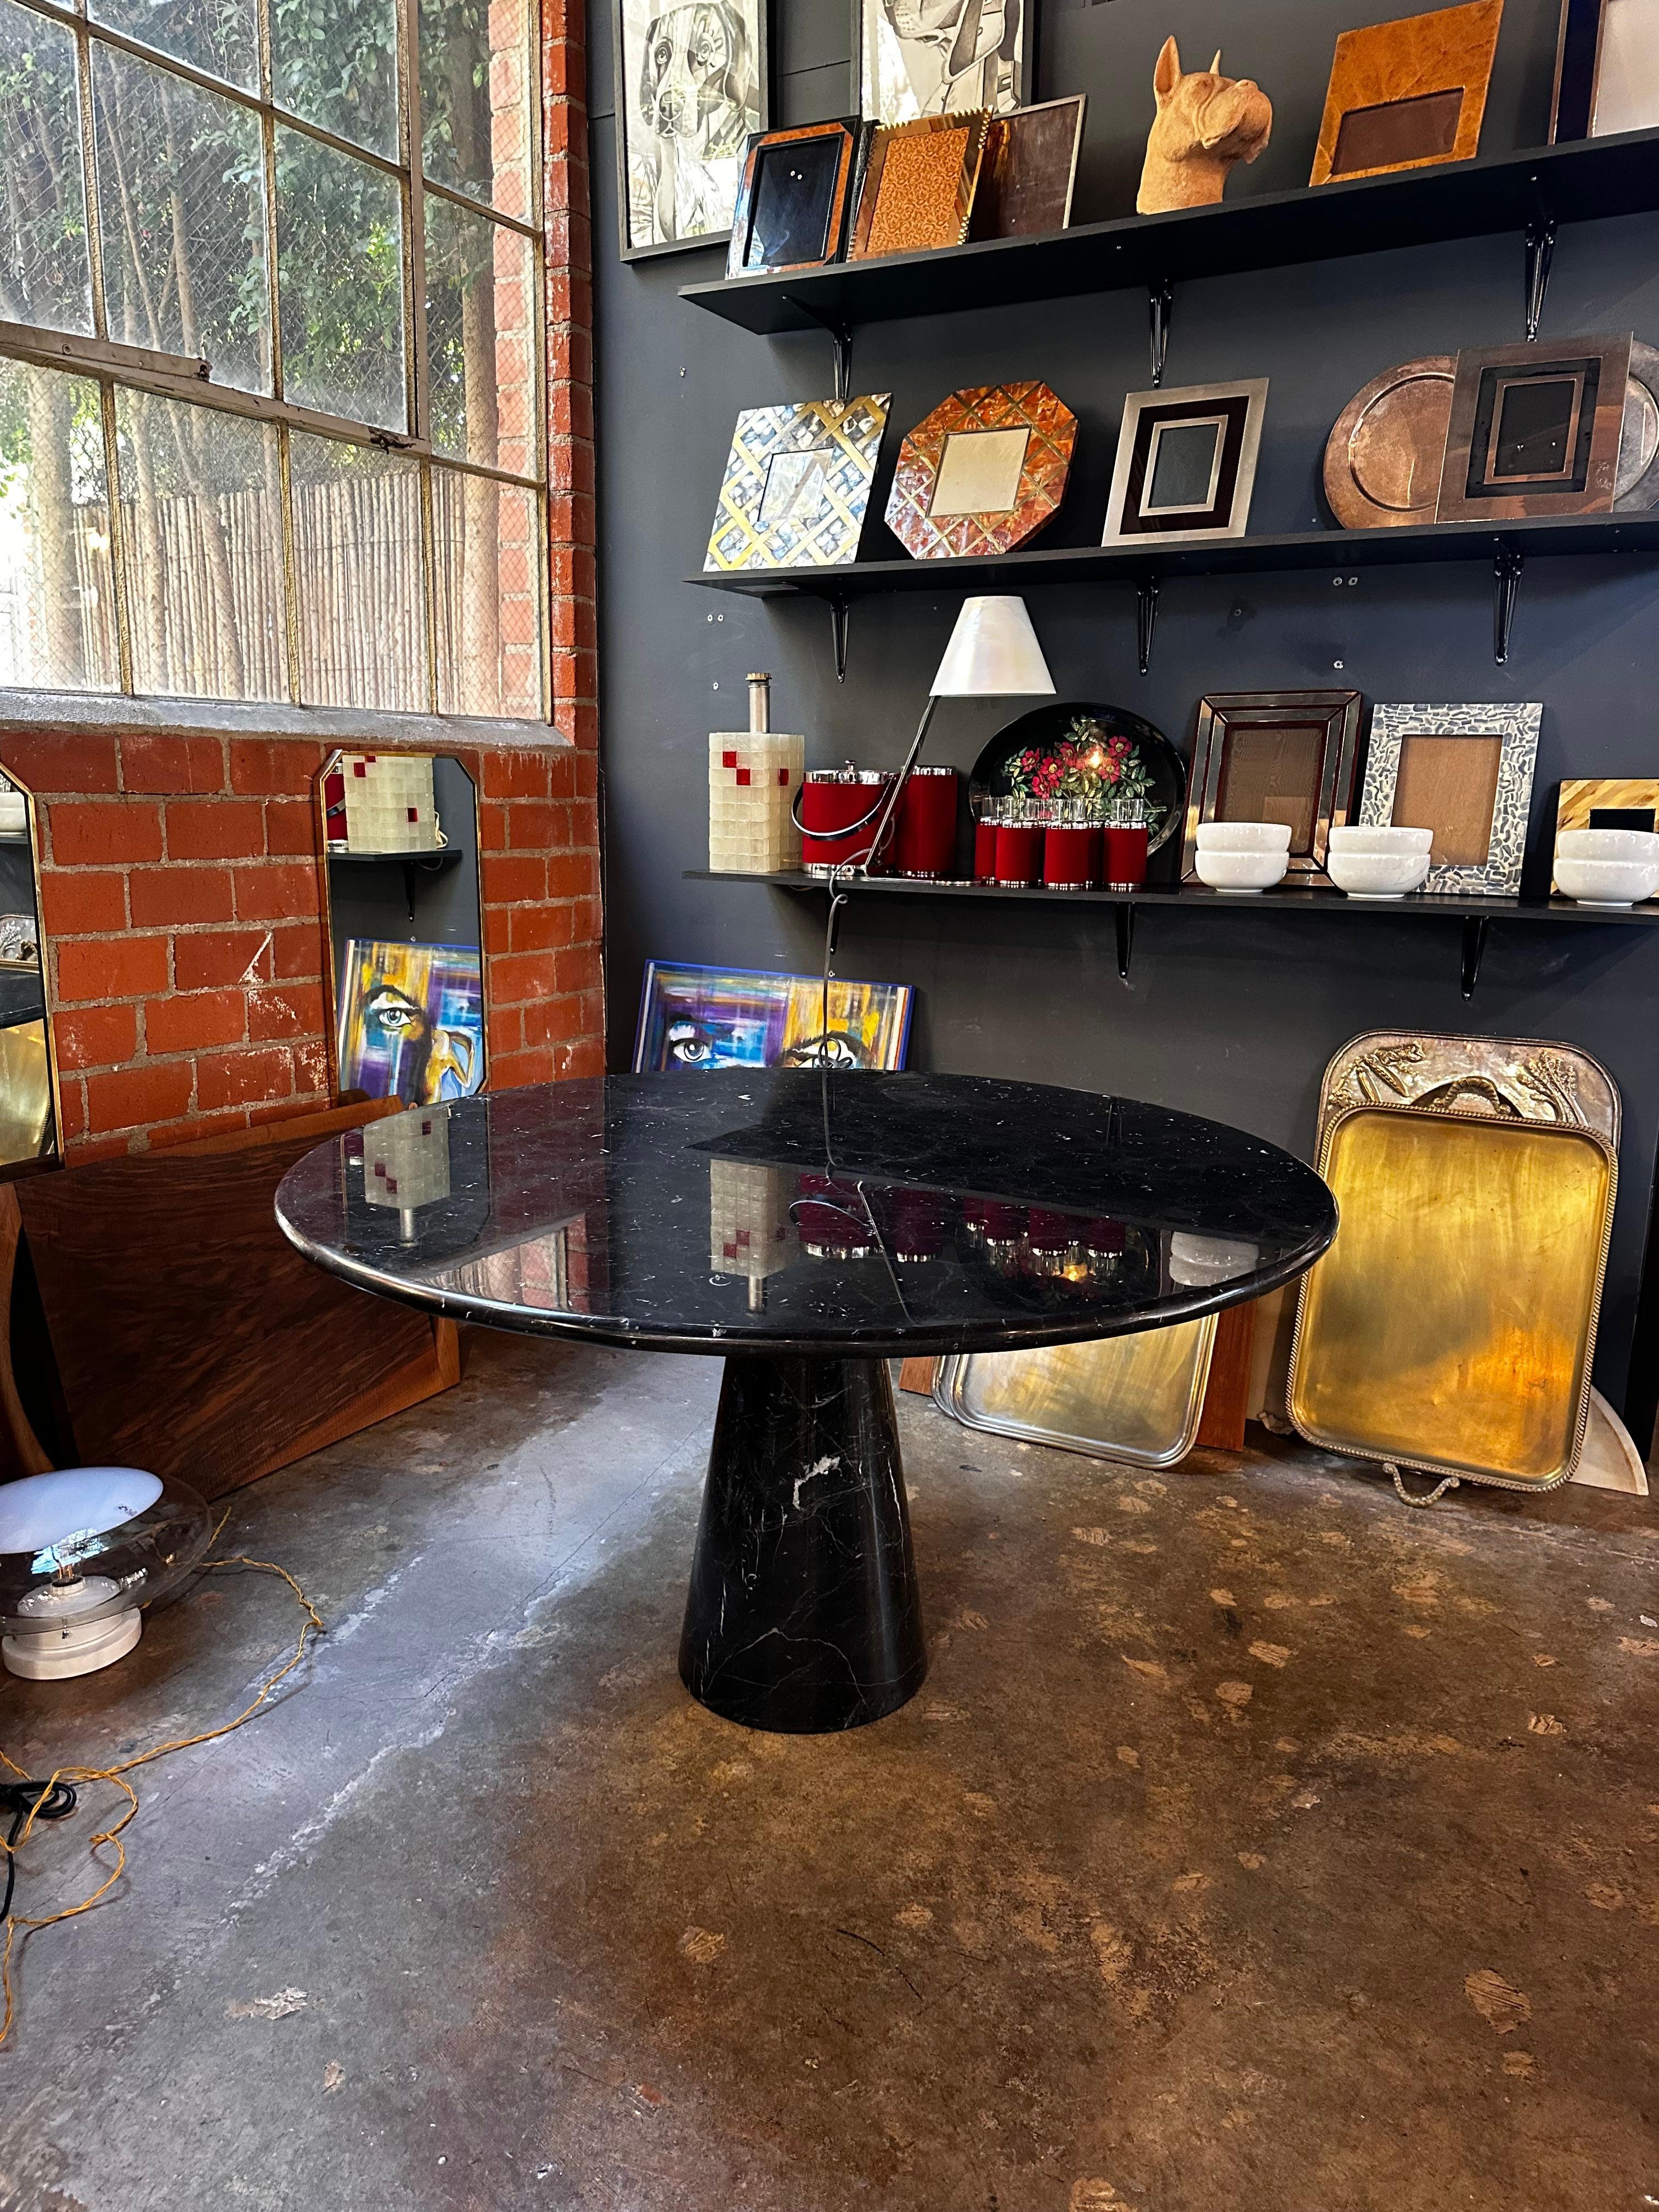 The Angelo Mangiarotti Black Marquina Marble Round Dining Table from the 1970s is a classic piece of Italian design. Designed by Angelo Mangiarotti, a renowned architect and designer, this dining table features a round top made of high-quality Black